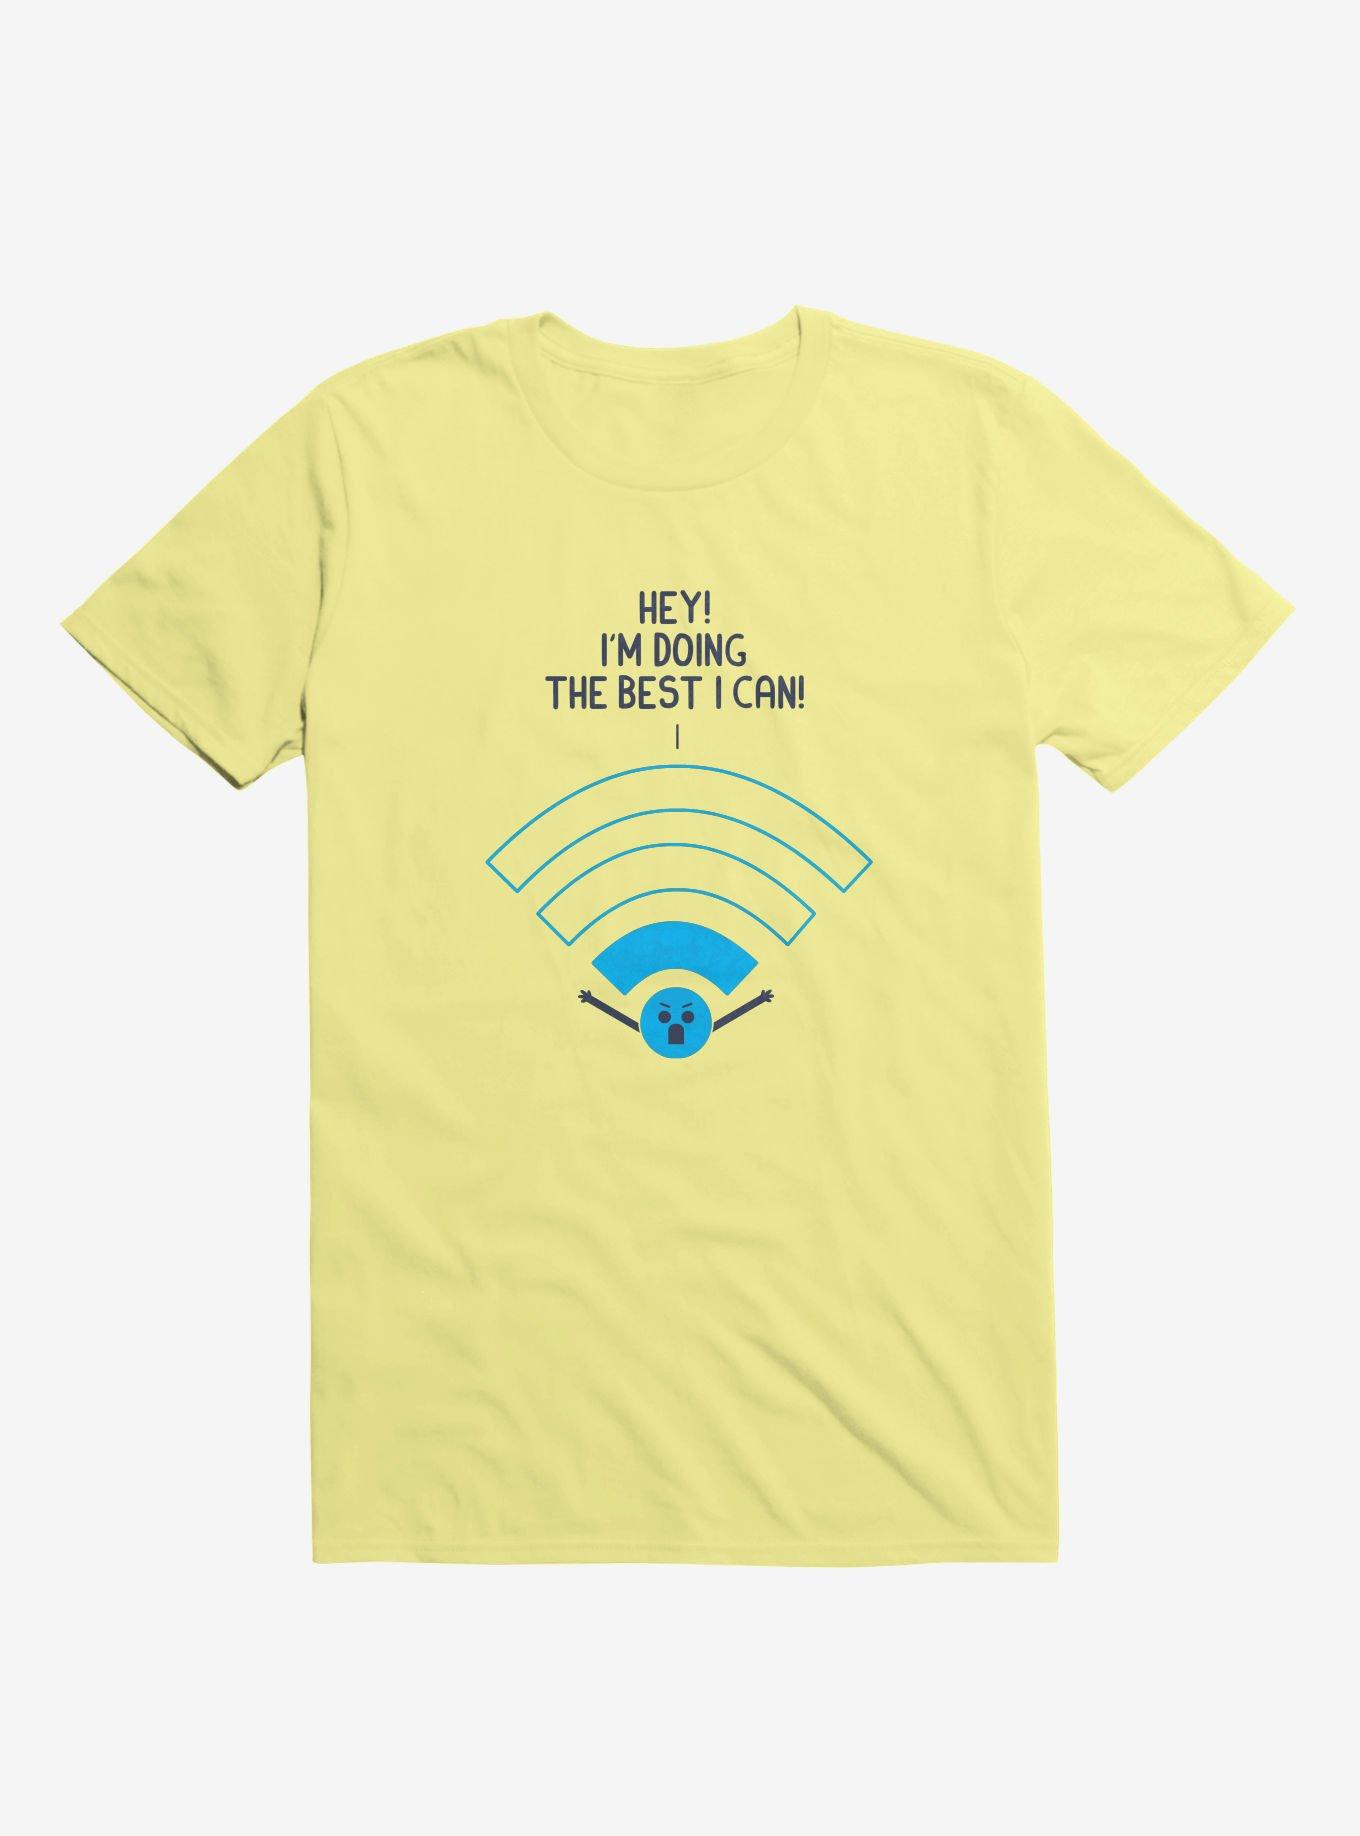 Angry Wi-Fi Hey! I'm Doing The Best I Can! Corn Silk Yellow T-Shirt, CORN SILK, hi-res